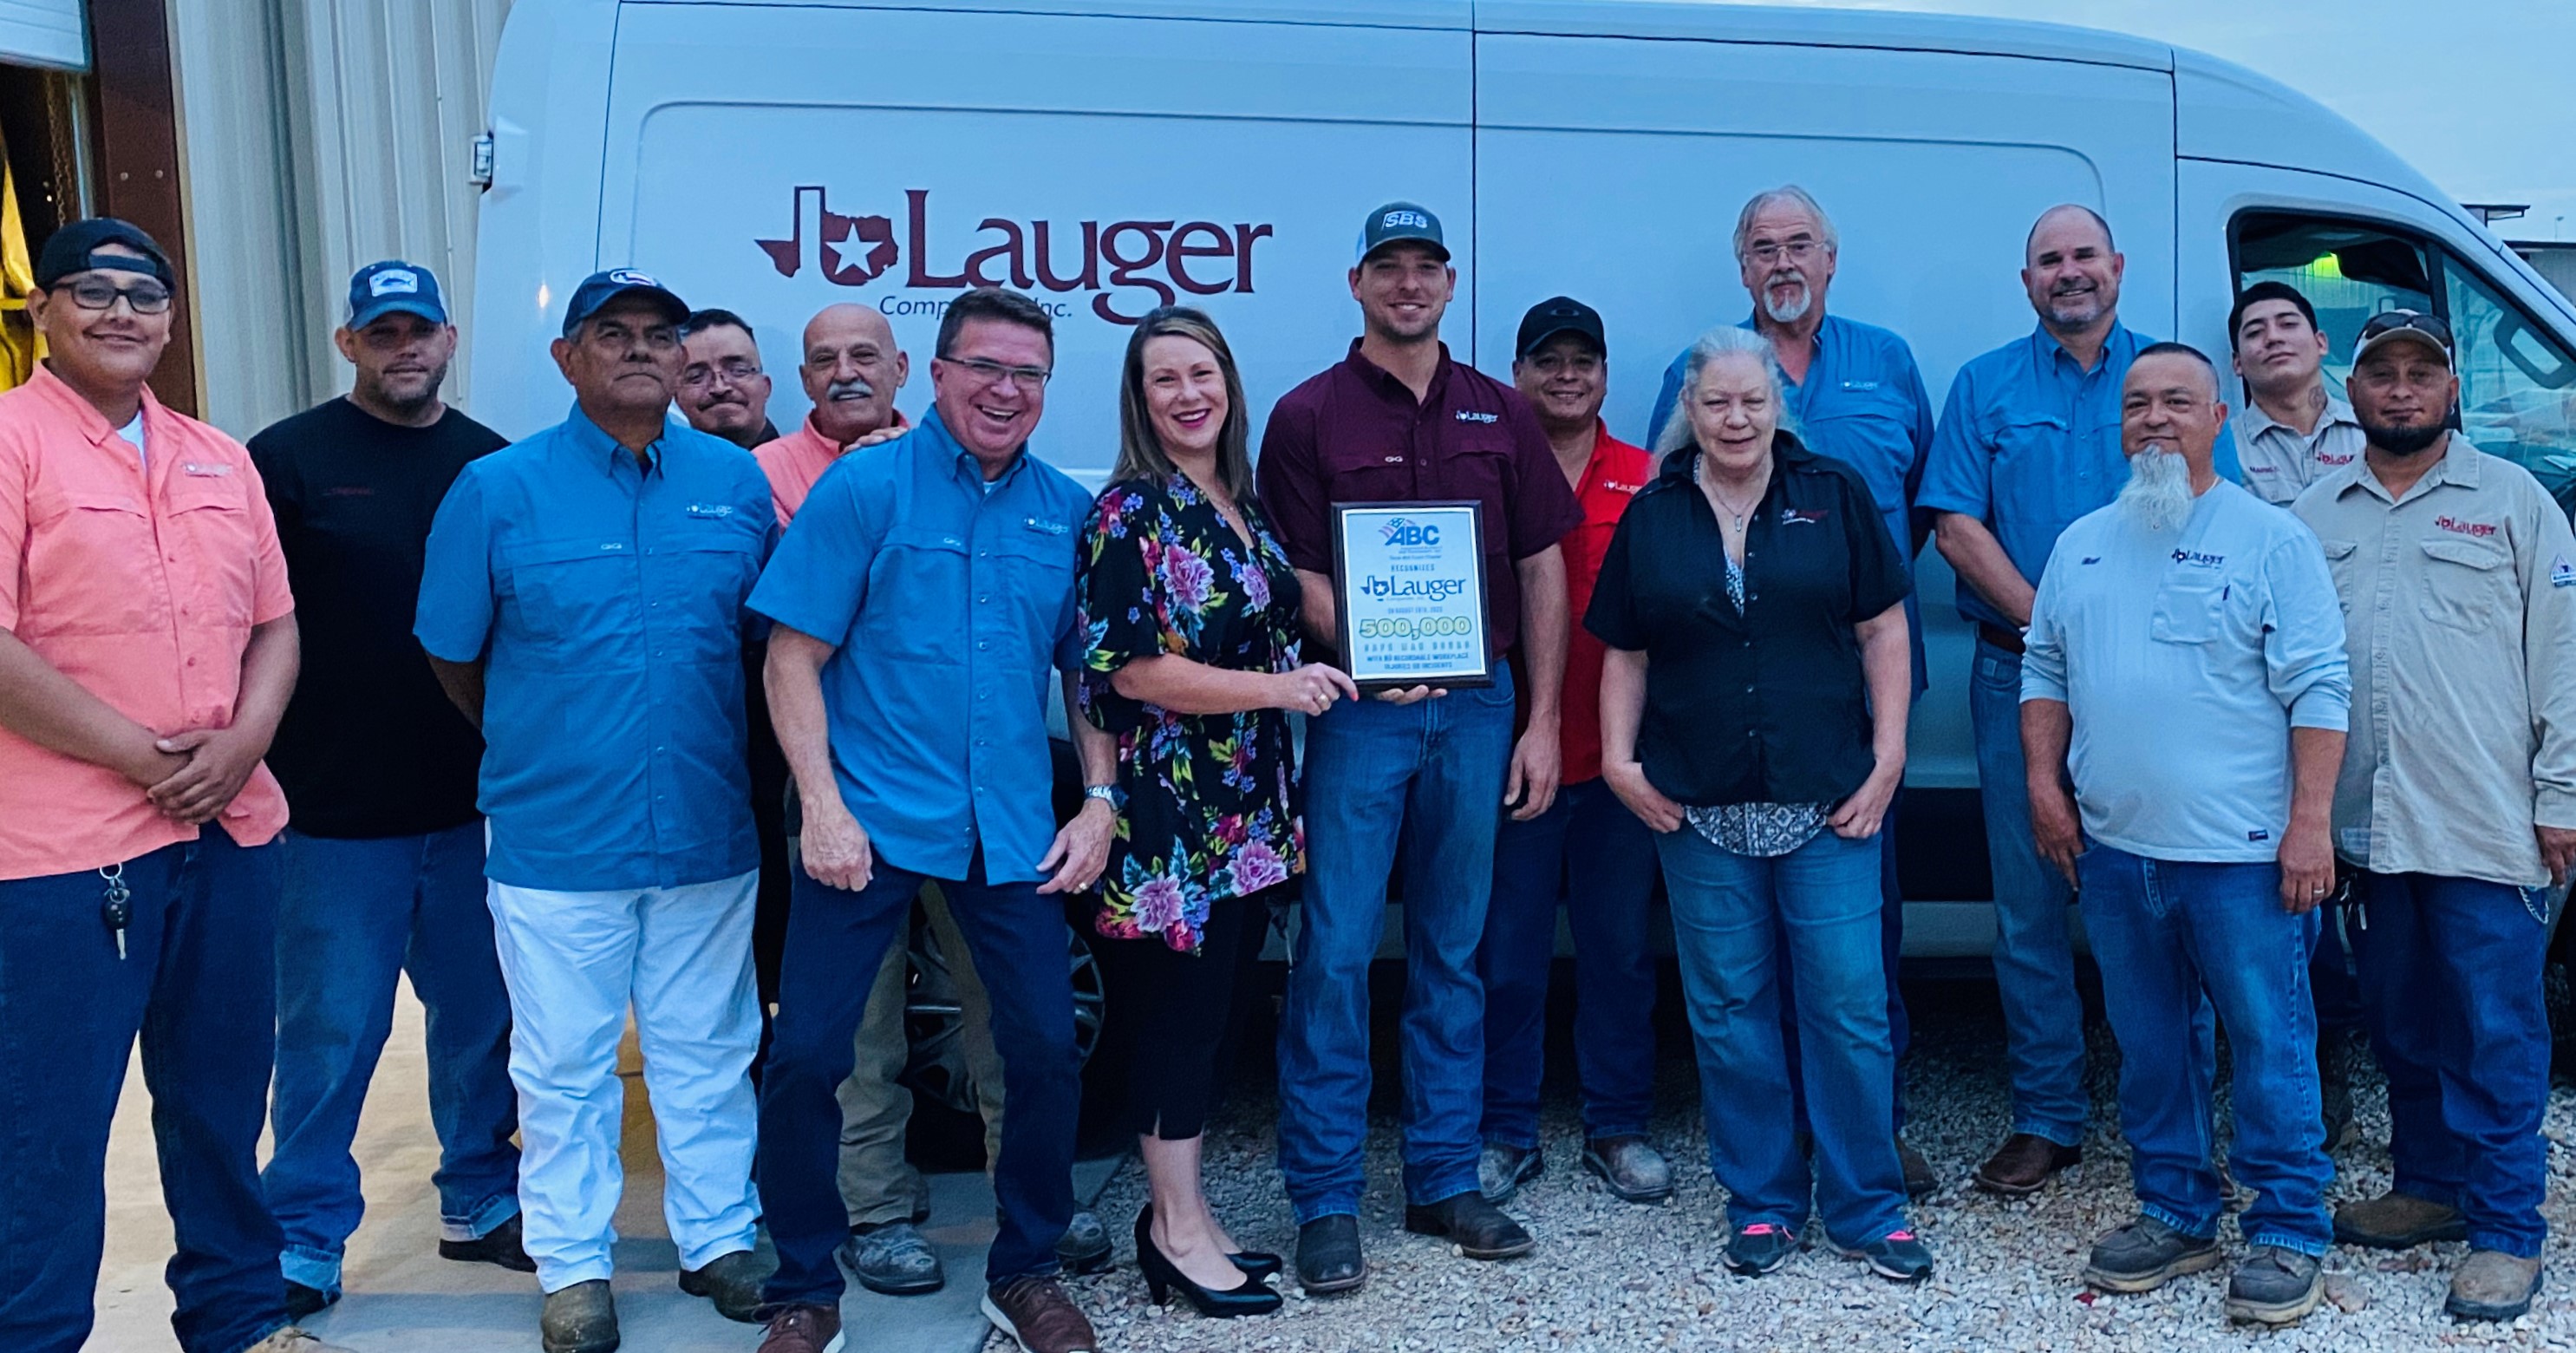 September 2020 - The Team Accepting an Award for Achieving 500,000 Safe Man Hours without a Recordable Incident or Injury